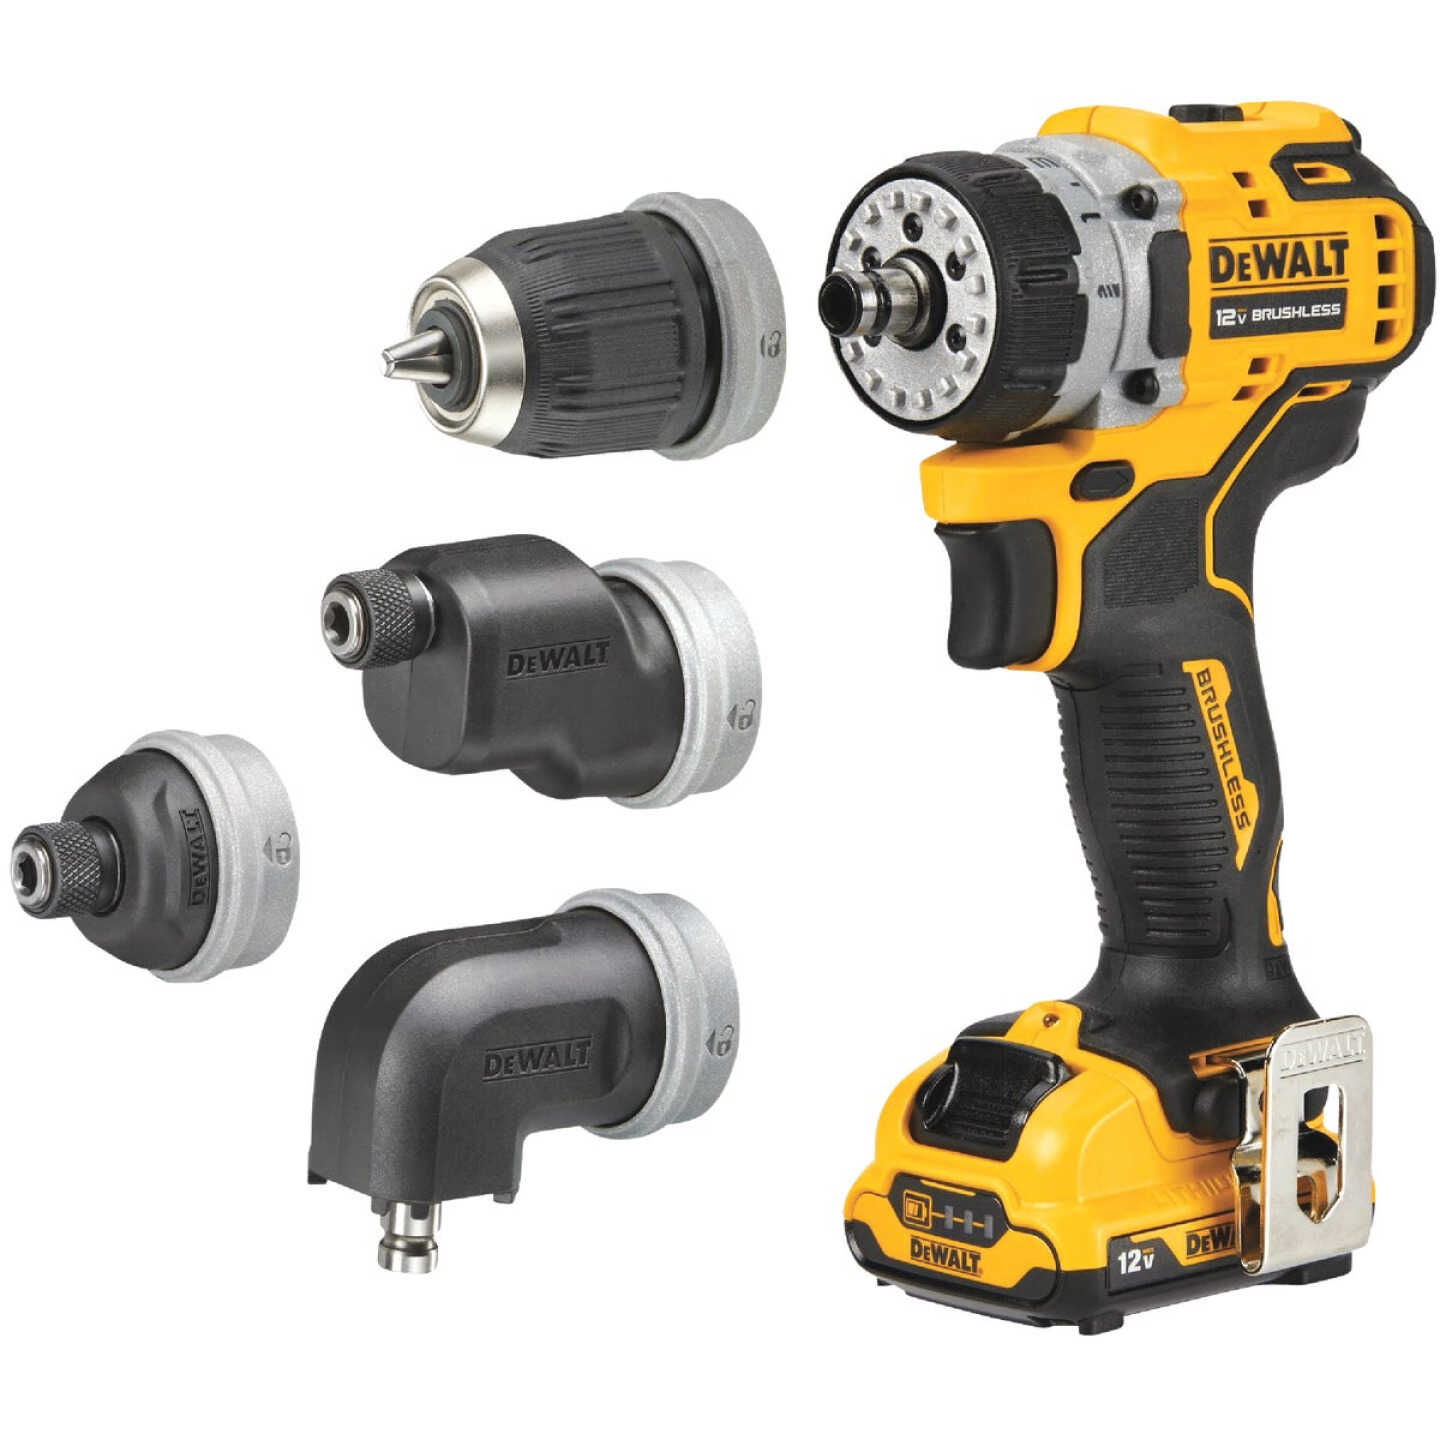 XTREME 12 Volt MAX Lithium-Ion In. Brushless 5-In-1 Cordless Drill/Driver Kit - Gillman Center